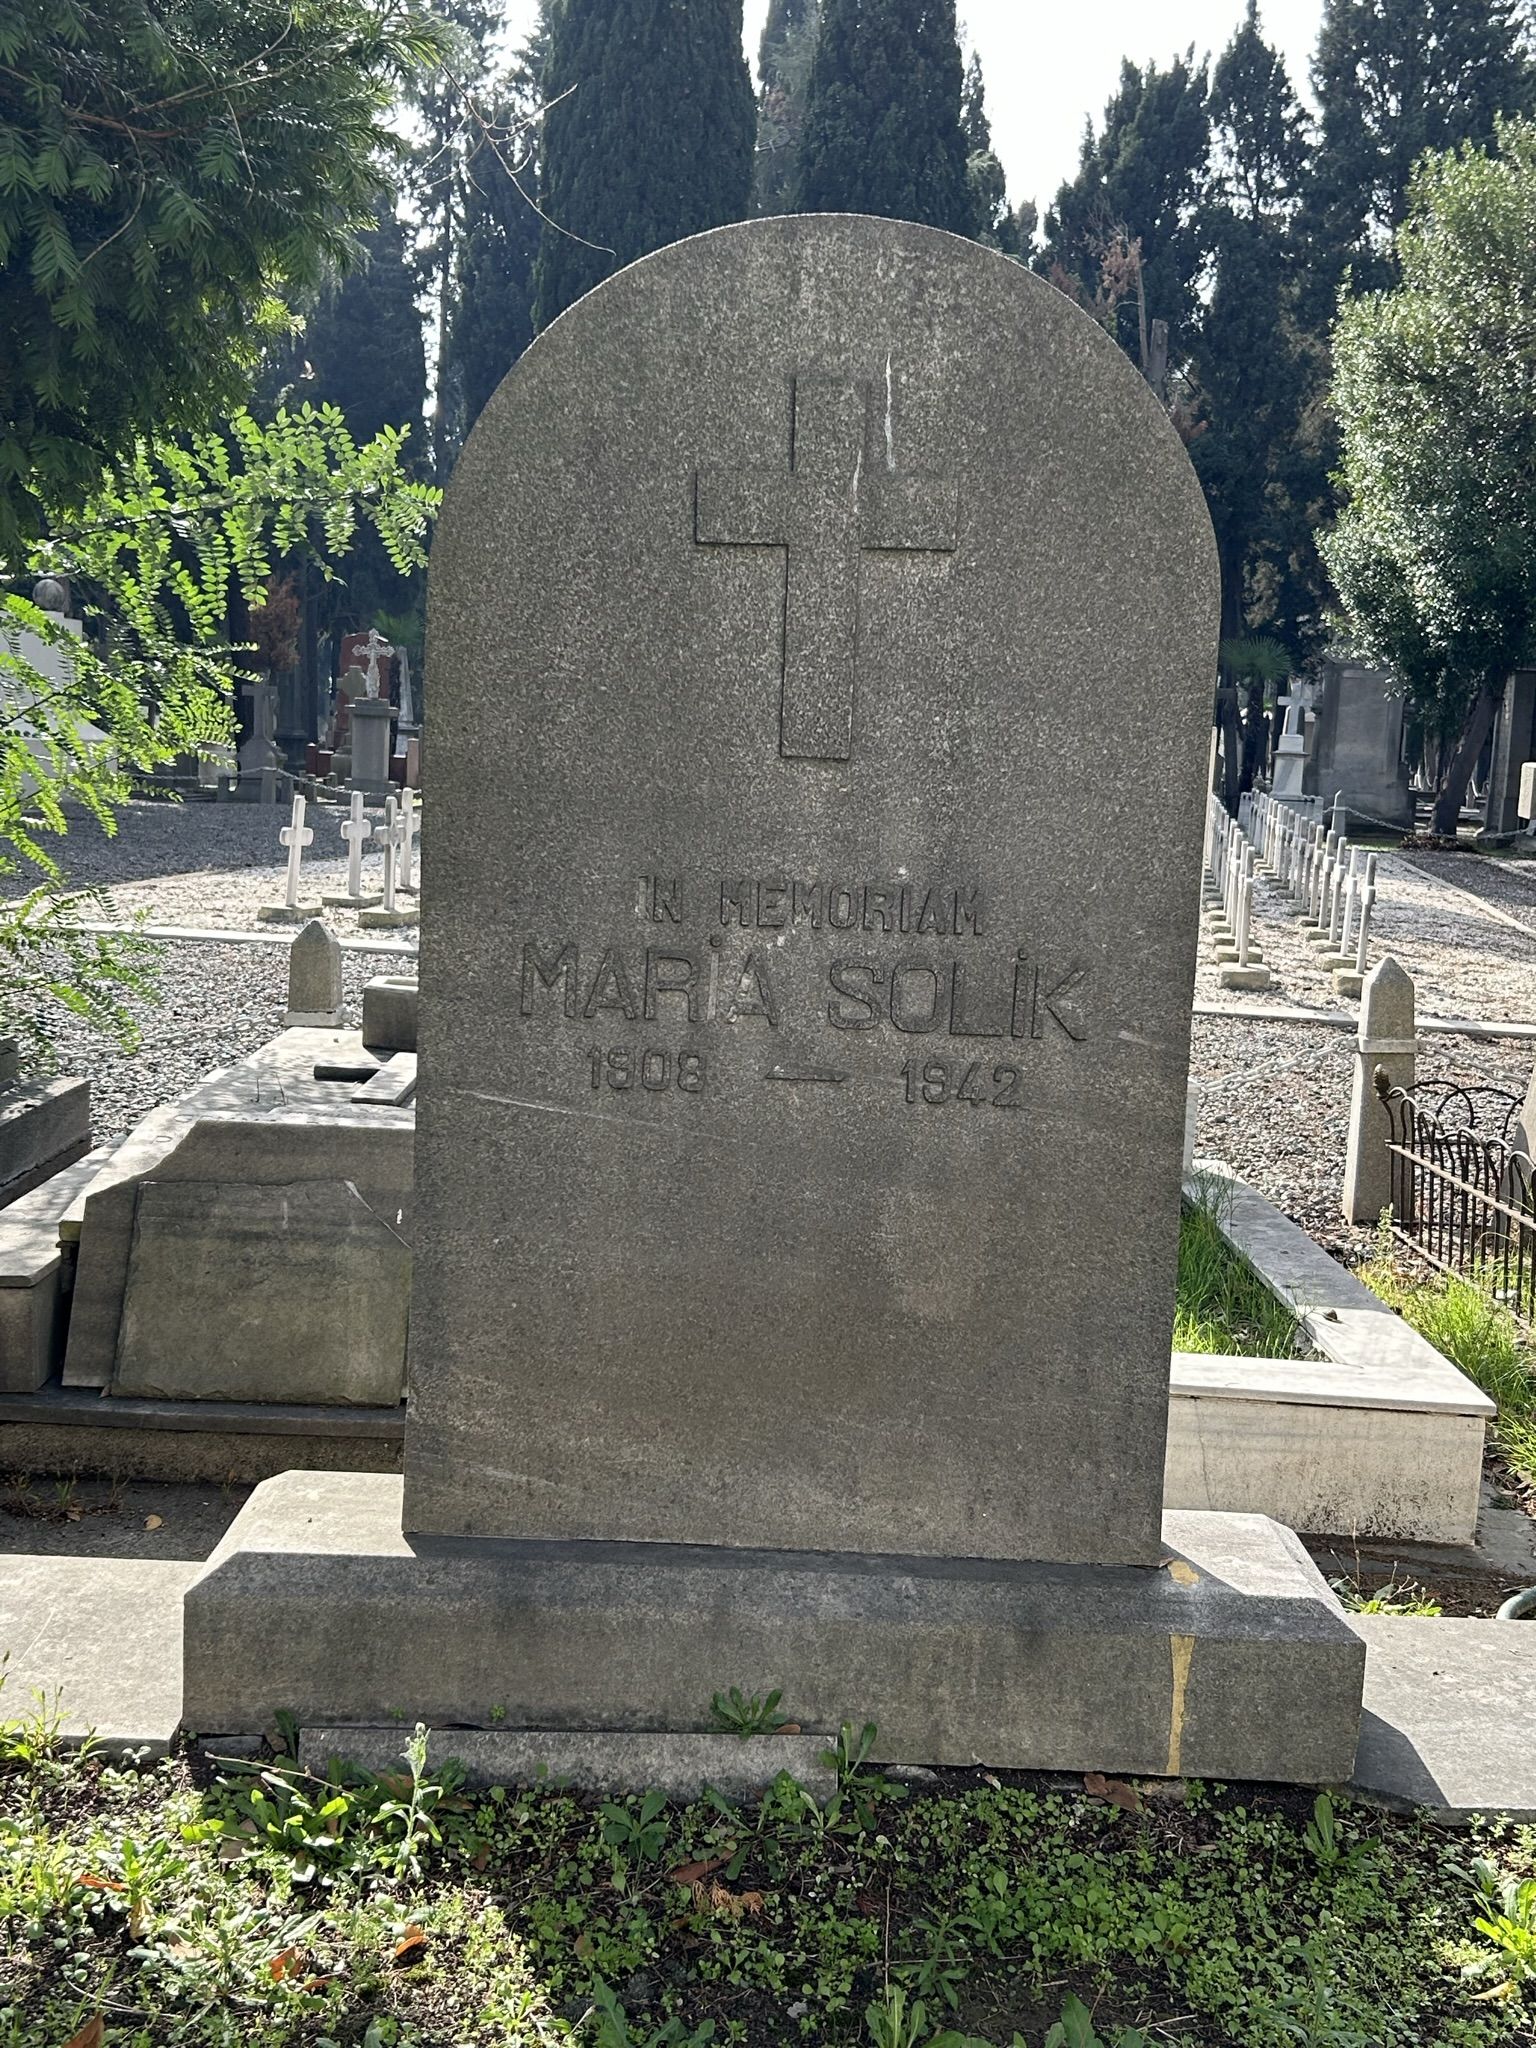 Inscription from the gravestone of Maria Solik, Catholic cemetery in Feriköy